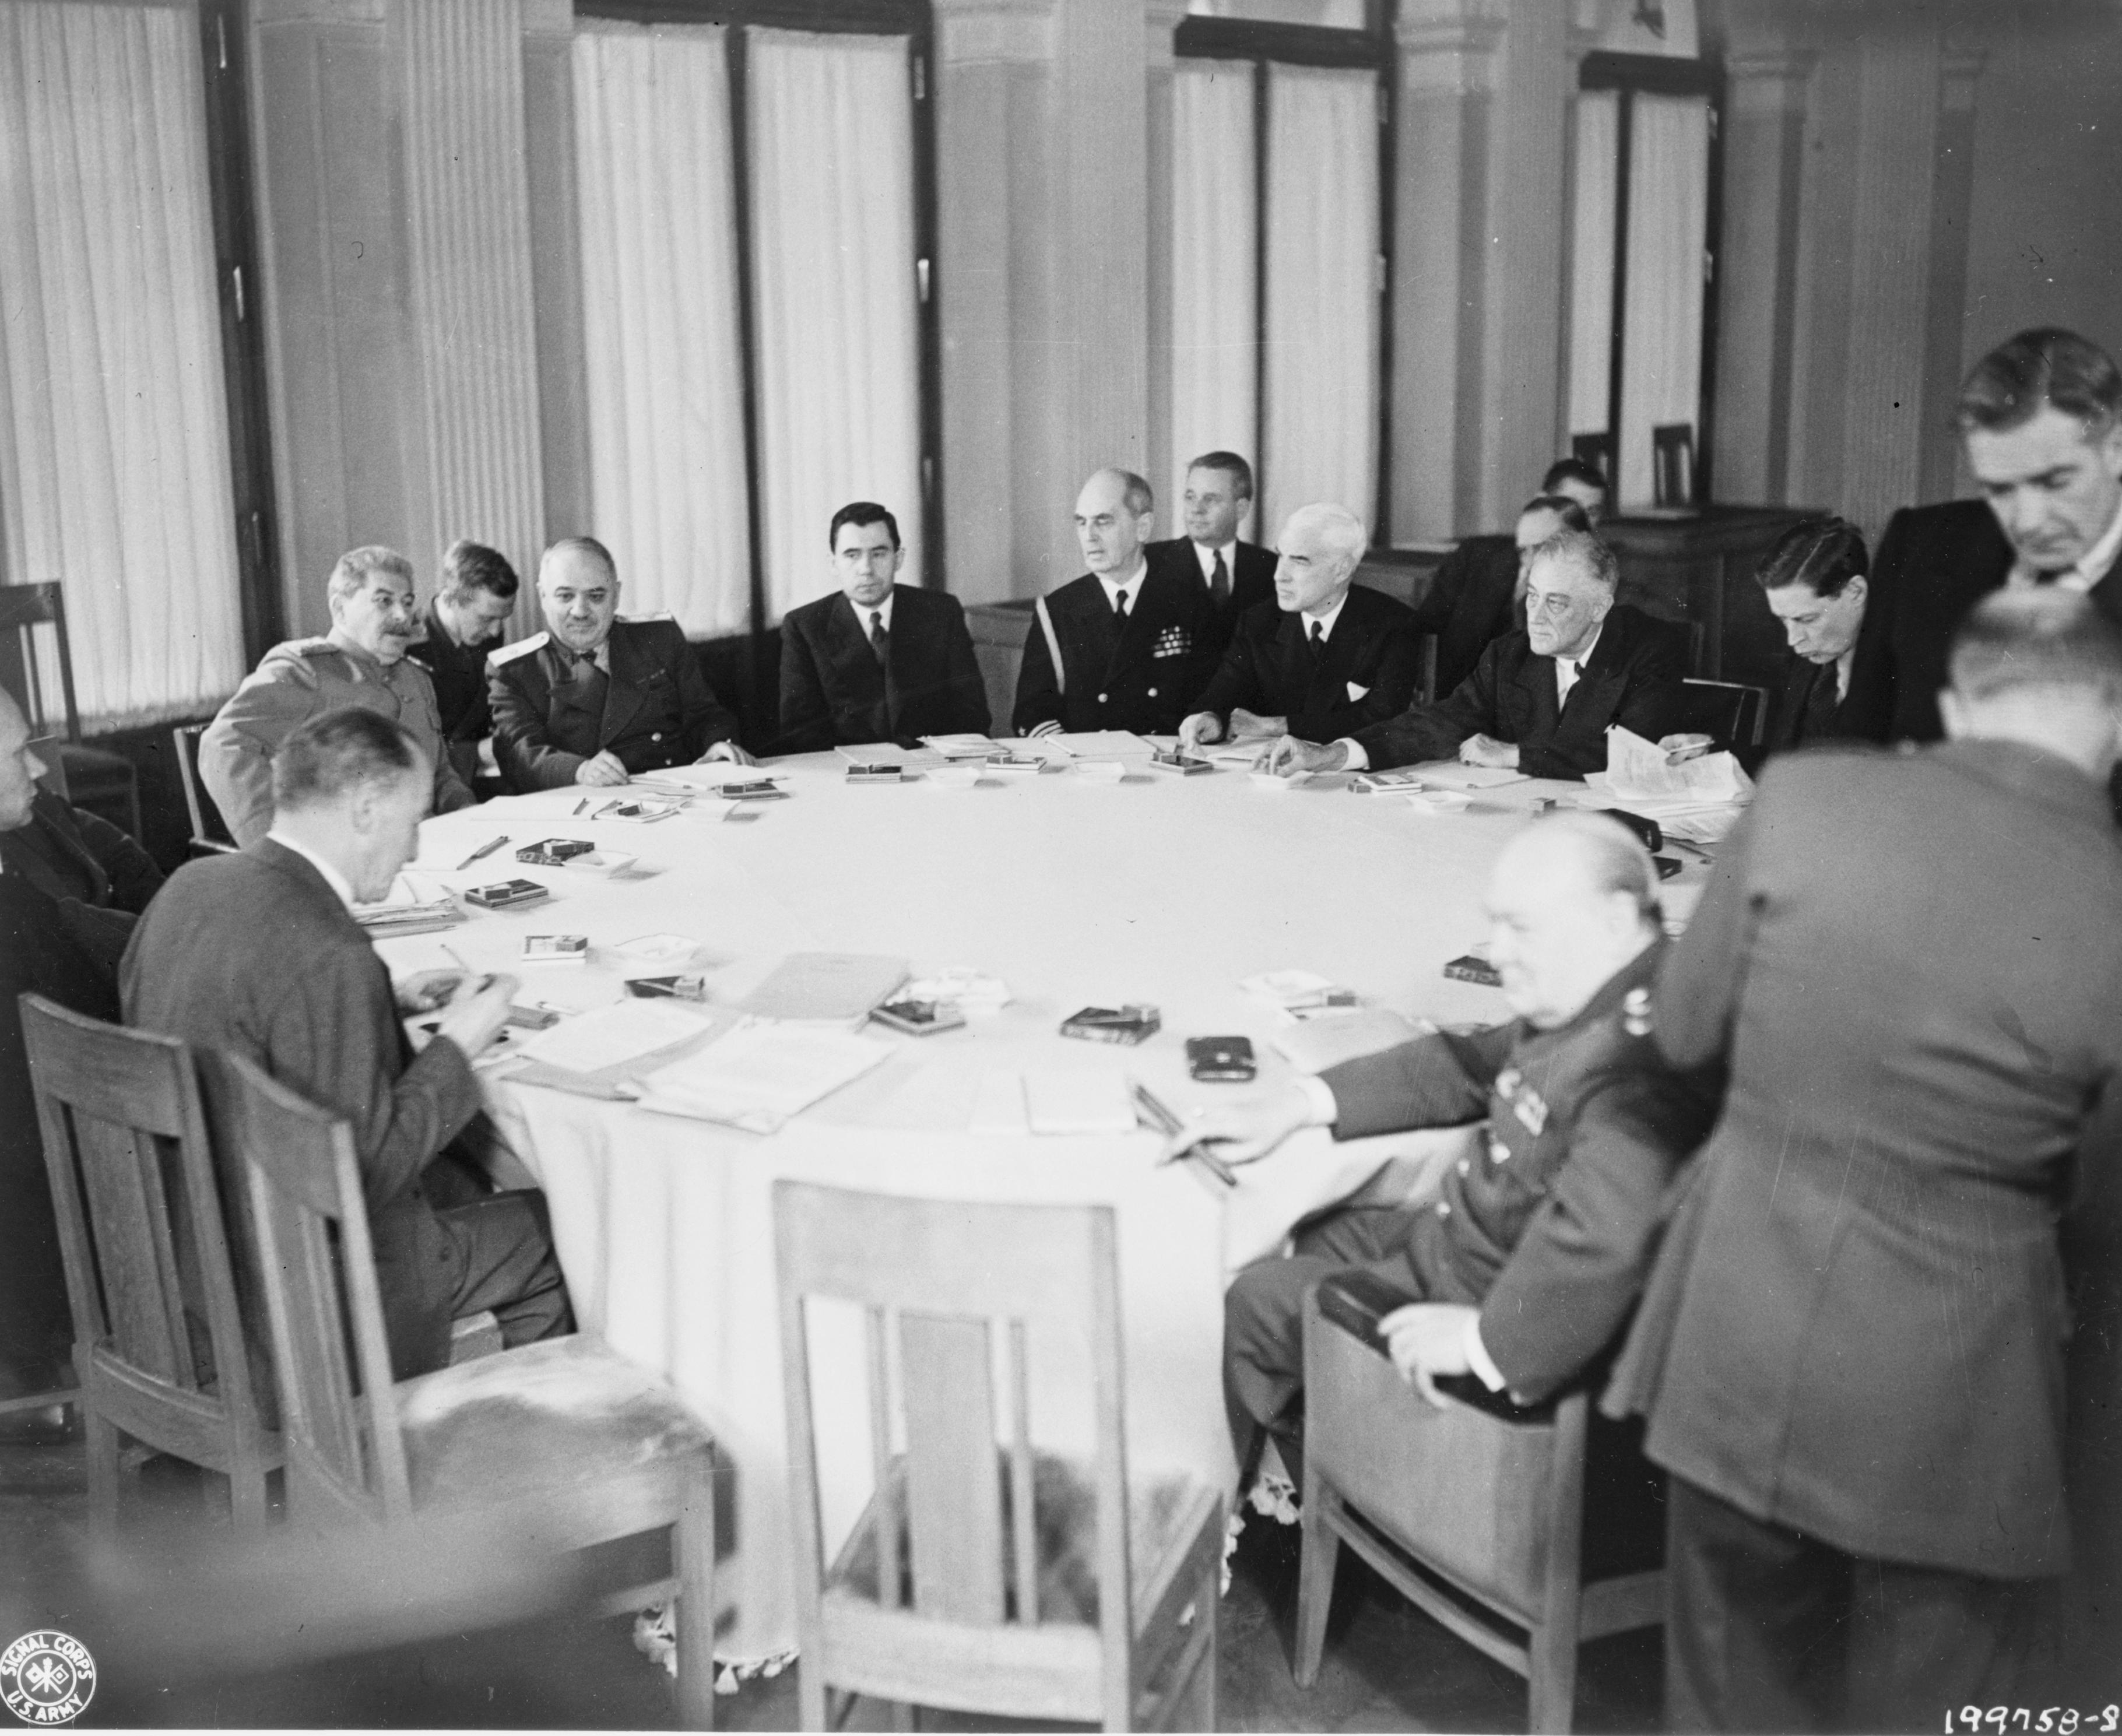 The conference table for the Yalta Conference, Feb 1945. Note Stalin, Roosevelt, and Churchill along with other officials seated around the table.